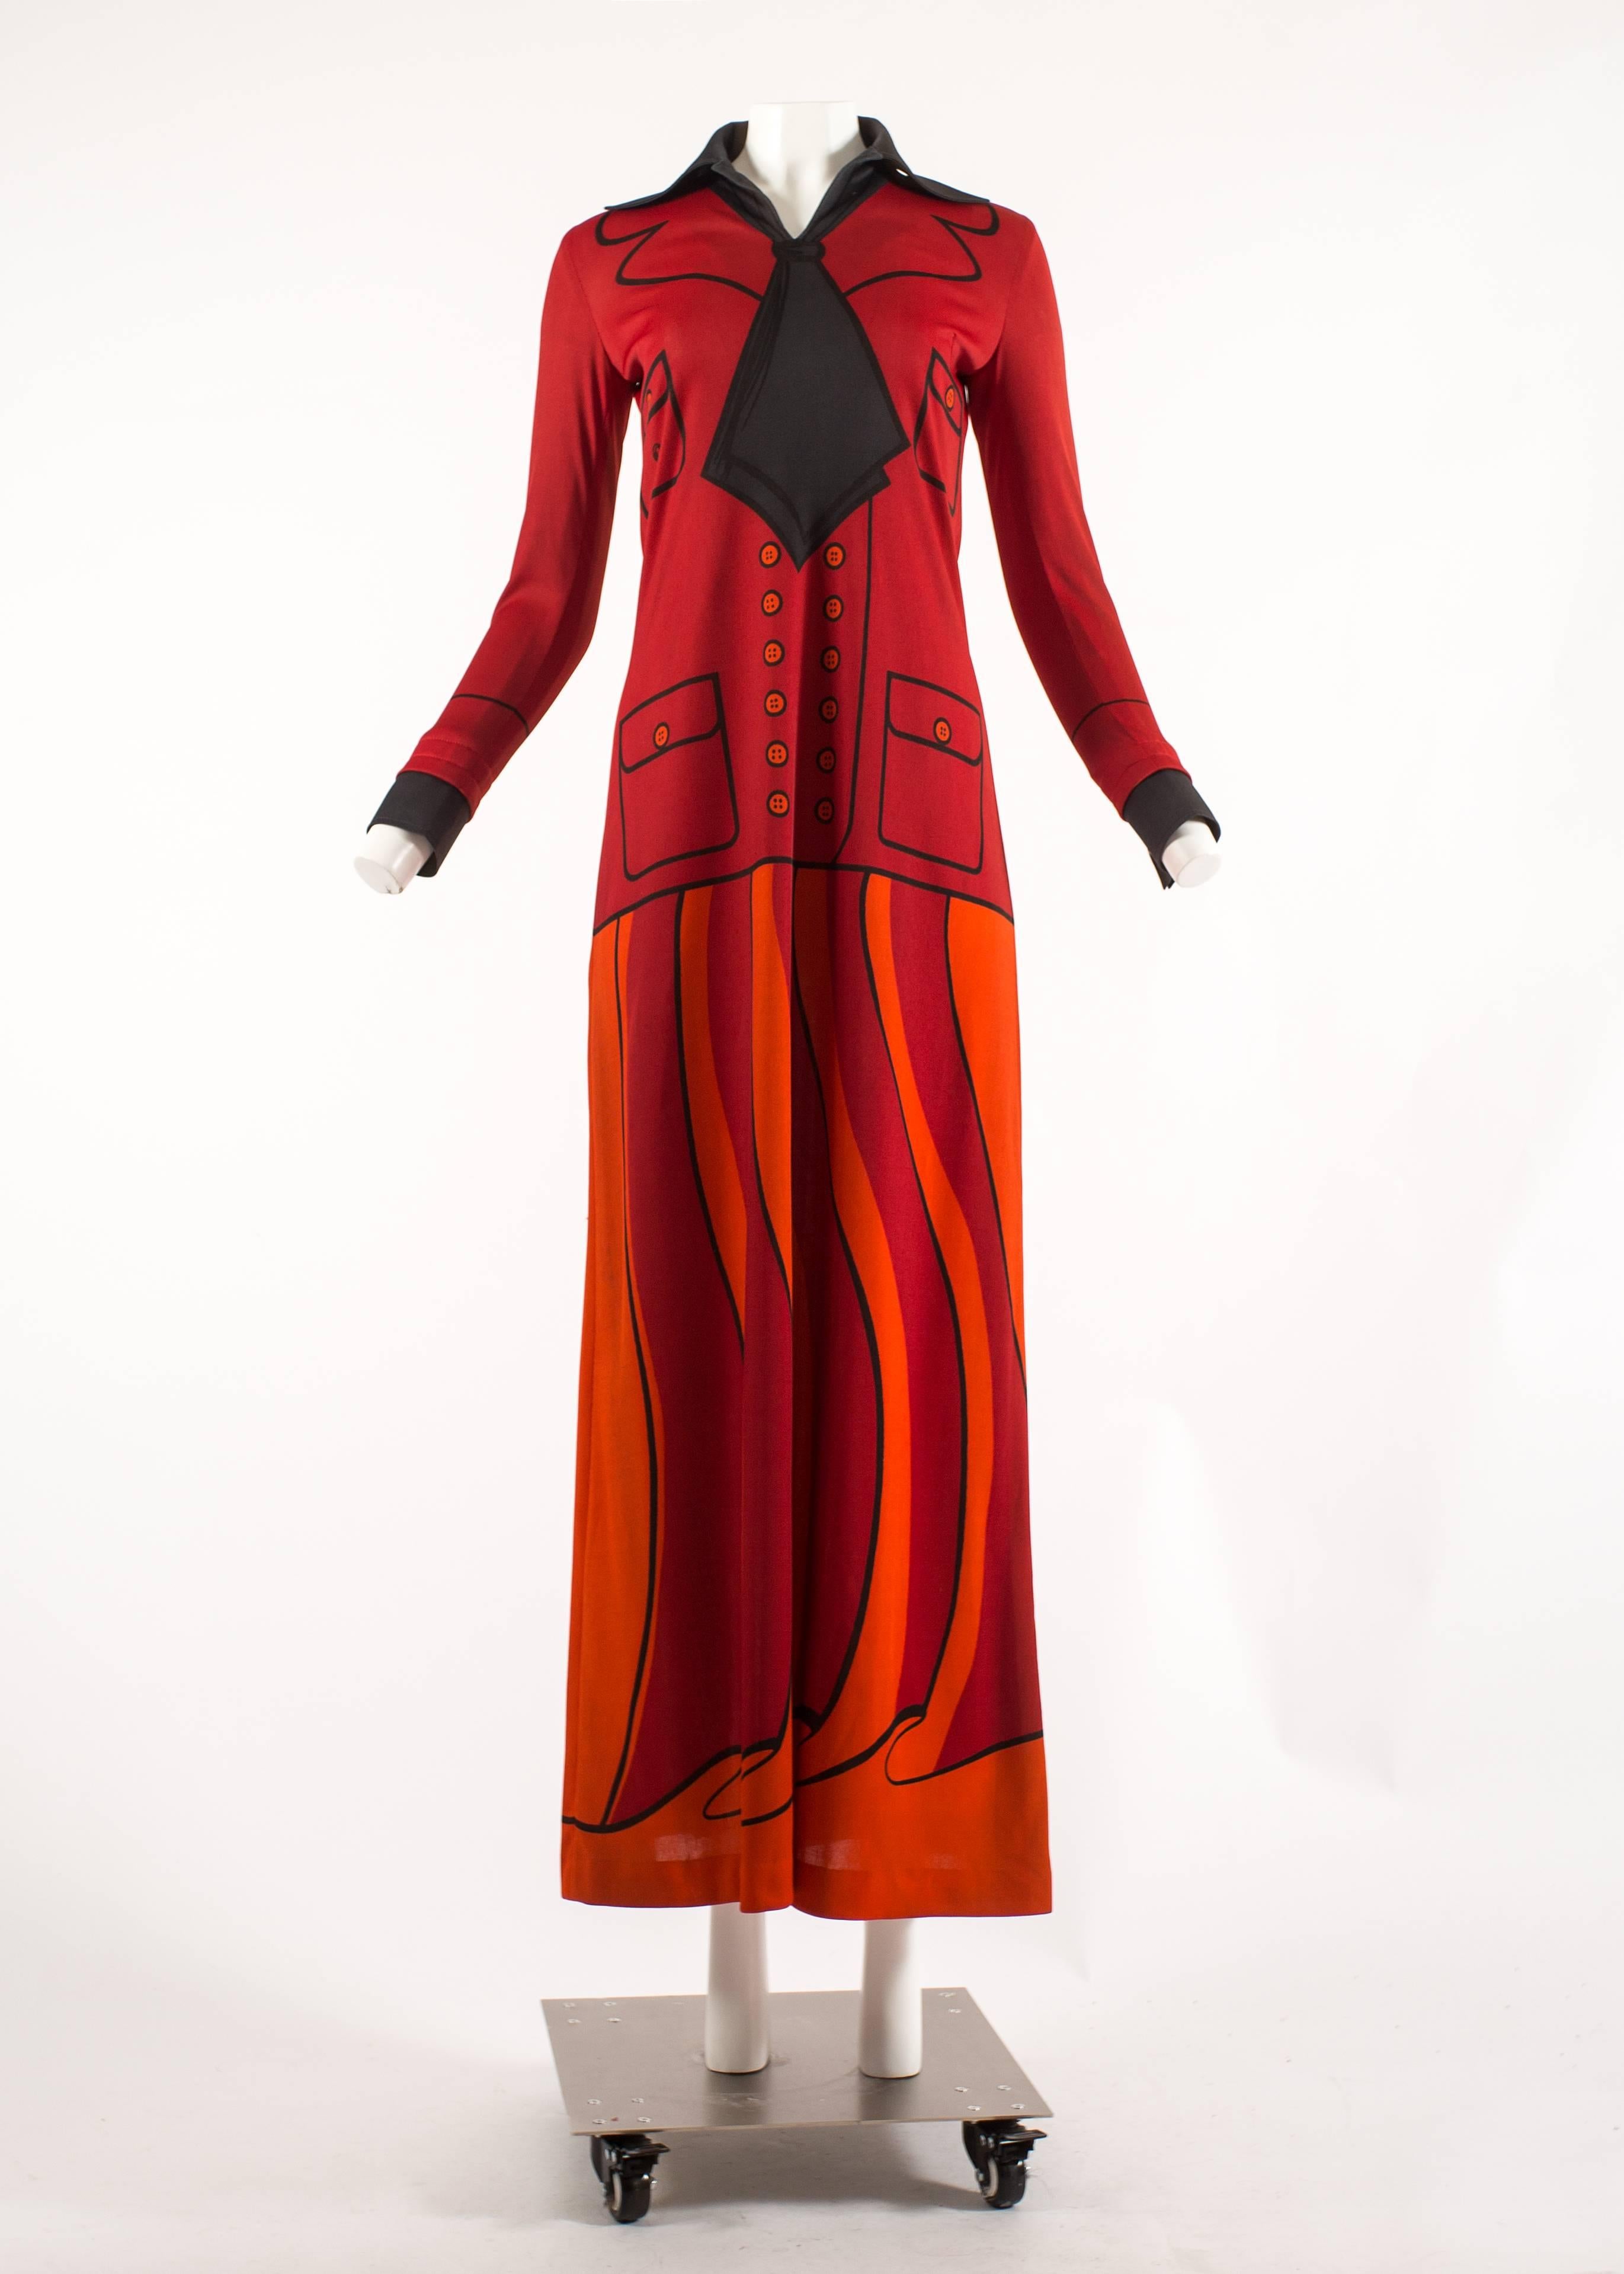 Roberta di Camerino 1973 jersey faux suit print maxi dress

- Maxi dress in polyester jersey, printed with a faux red jacket with scarf and skirt in a geometric design in red, orange and black

- zip fastening 
